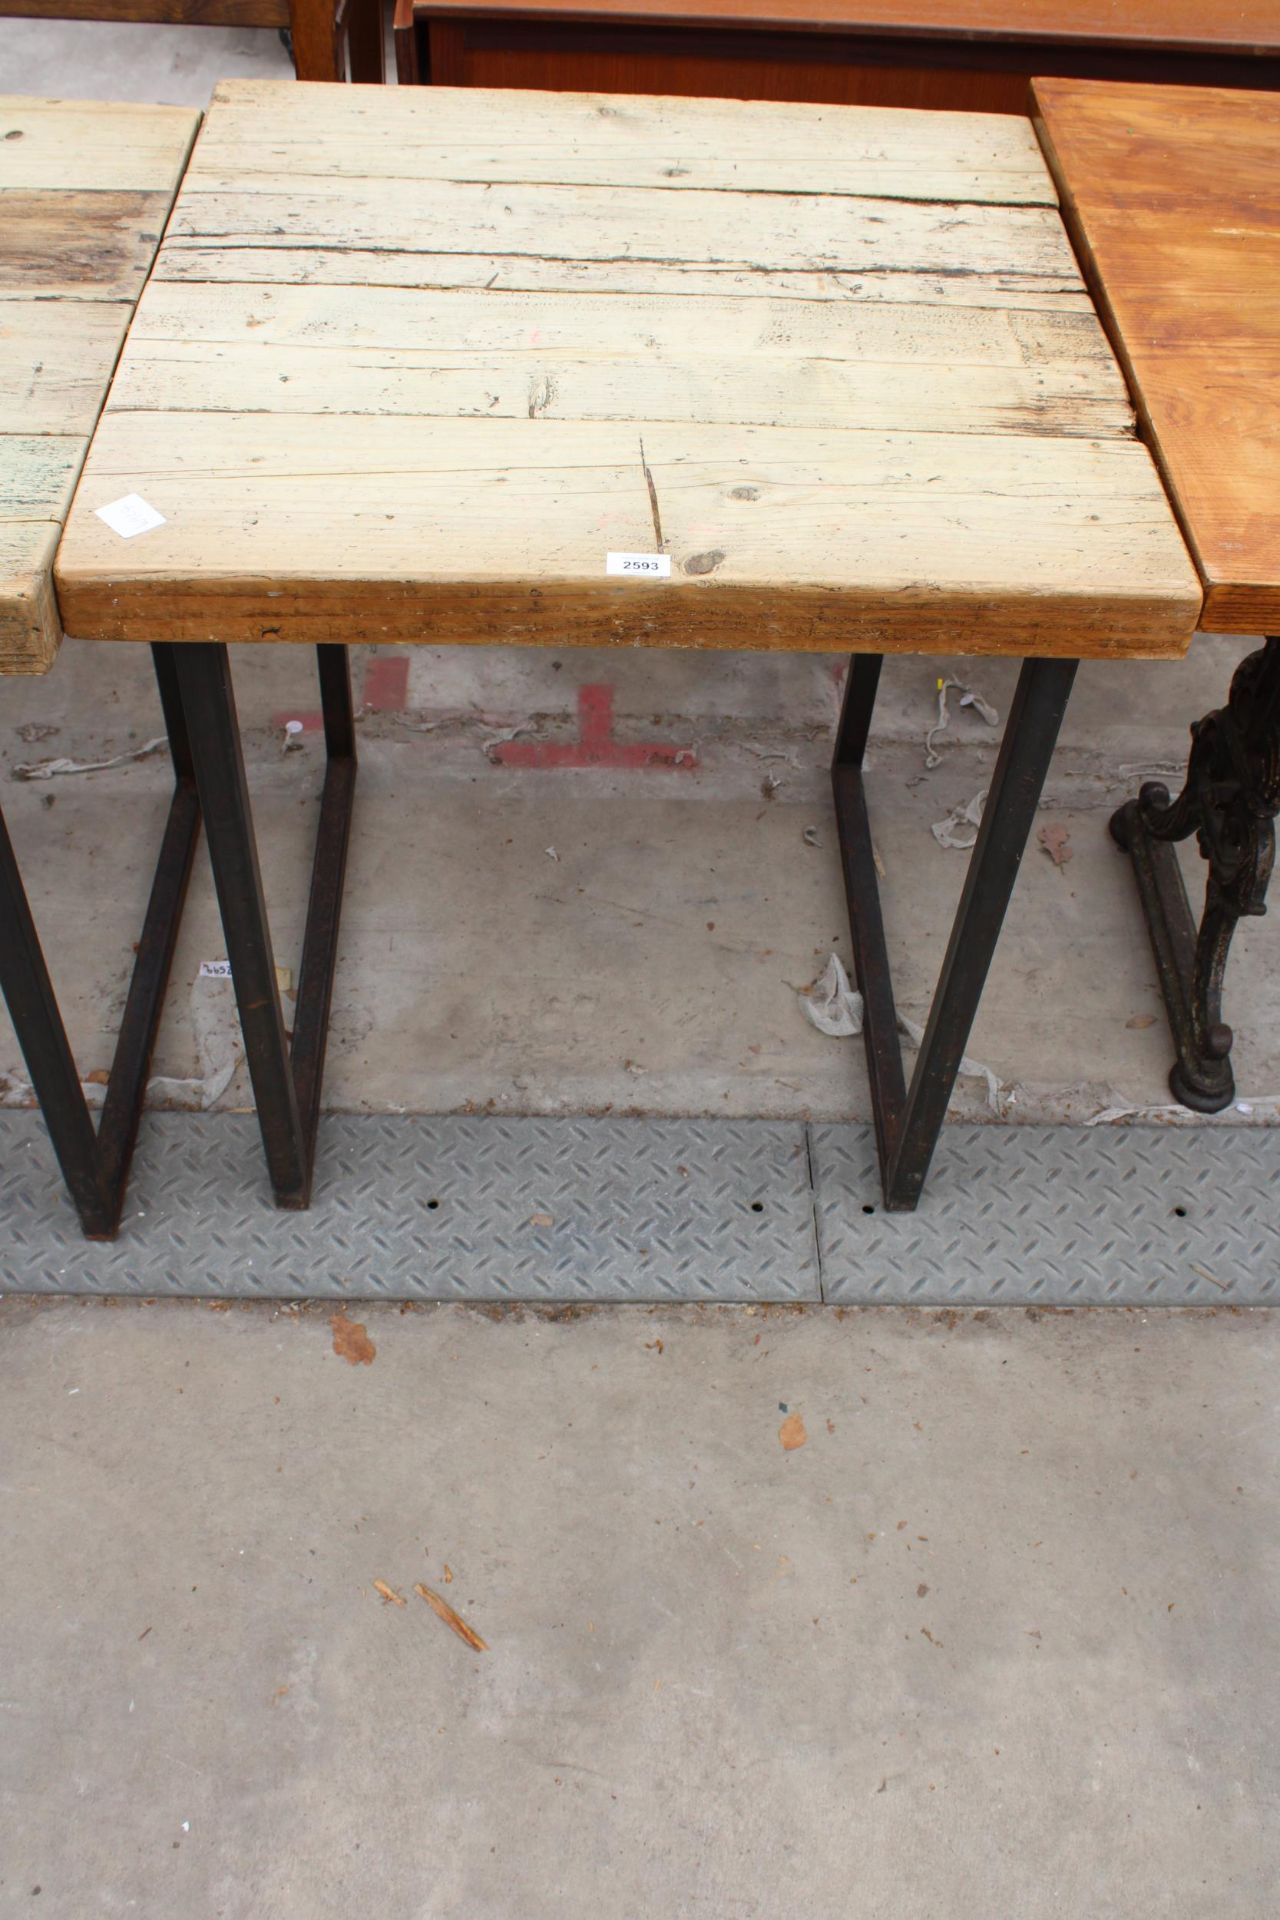 A RUSTIC FOUR PLANK TABLE, 27" SQUARE ON METAL LEGS